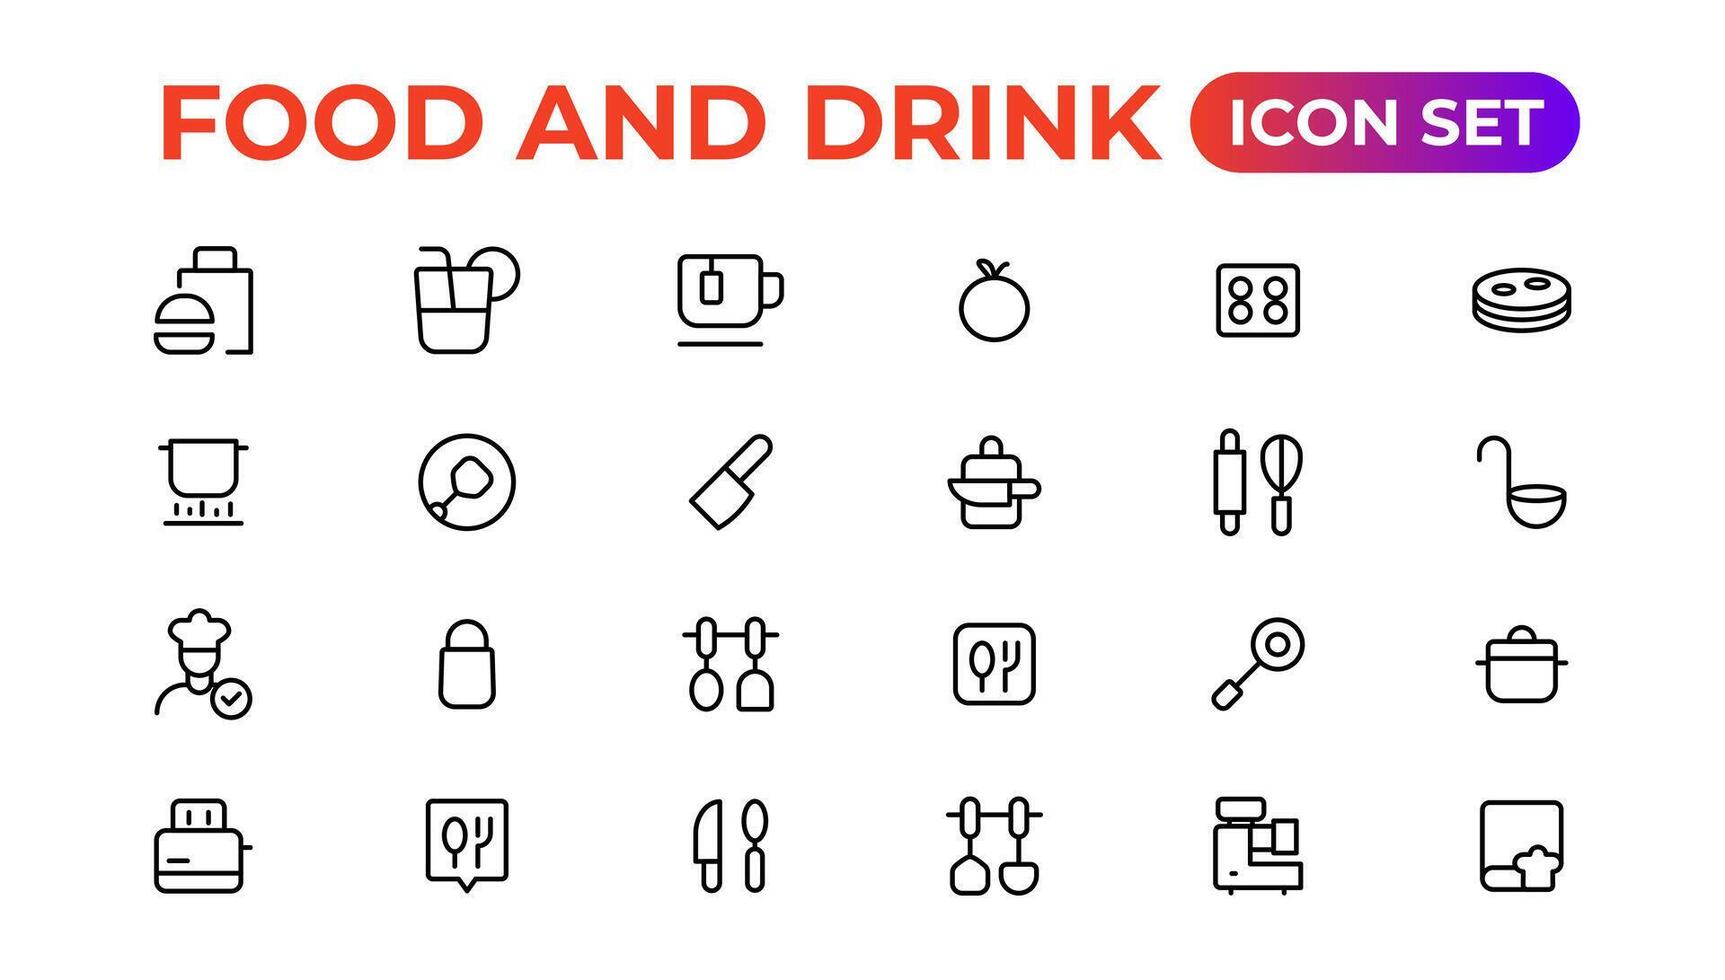 food and drink icons. filled icons such as drink water,apple leaf,pack,kitchen pack,barbecue grill,raspberry leaf,boiler,wine bottle and glass. vector